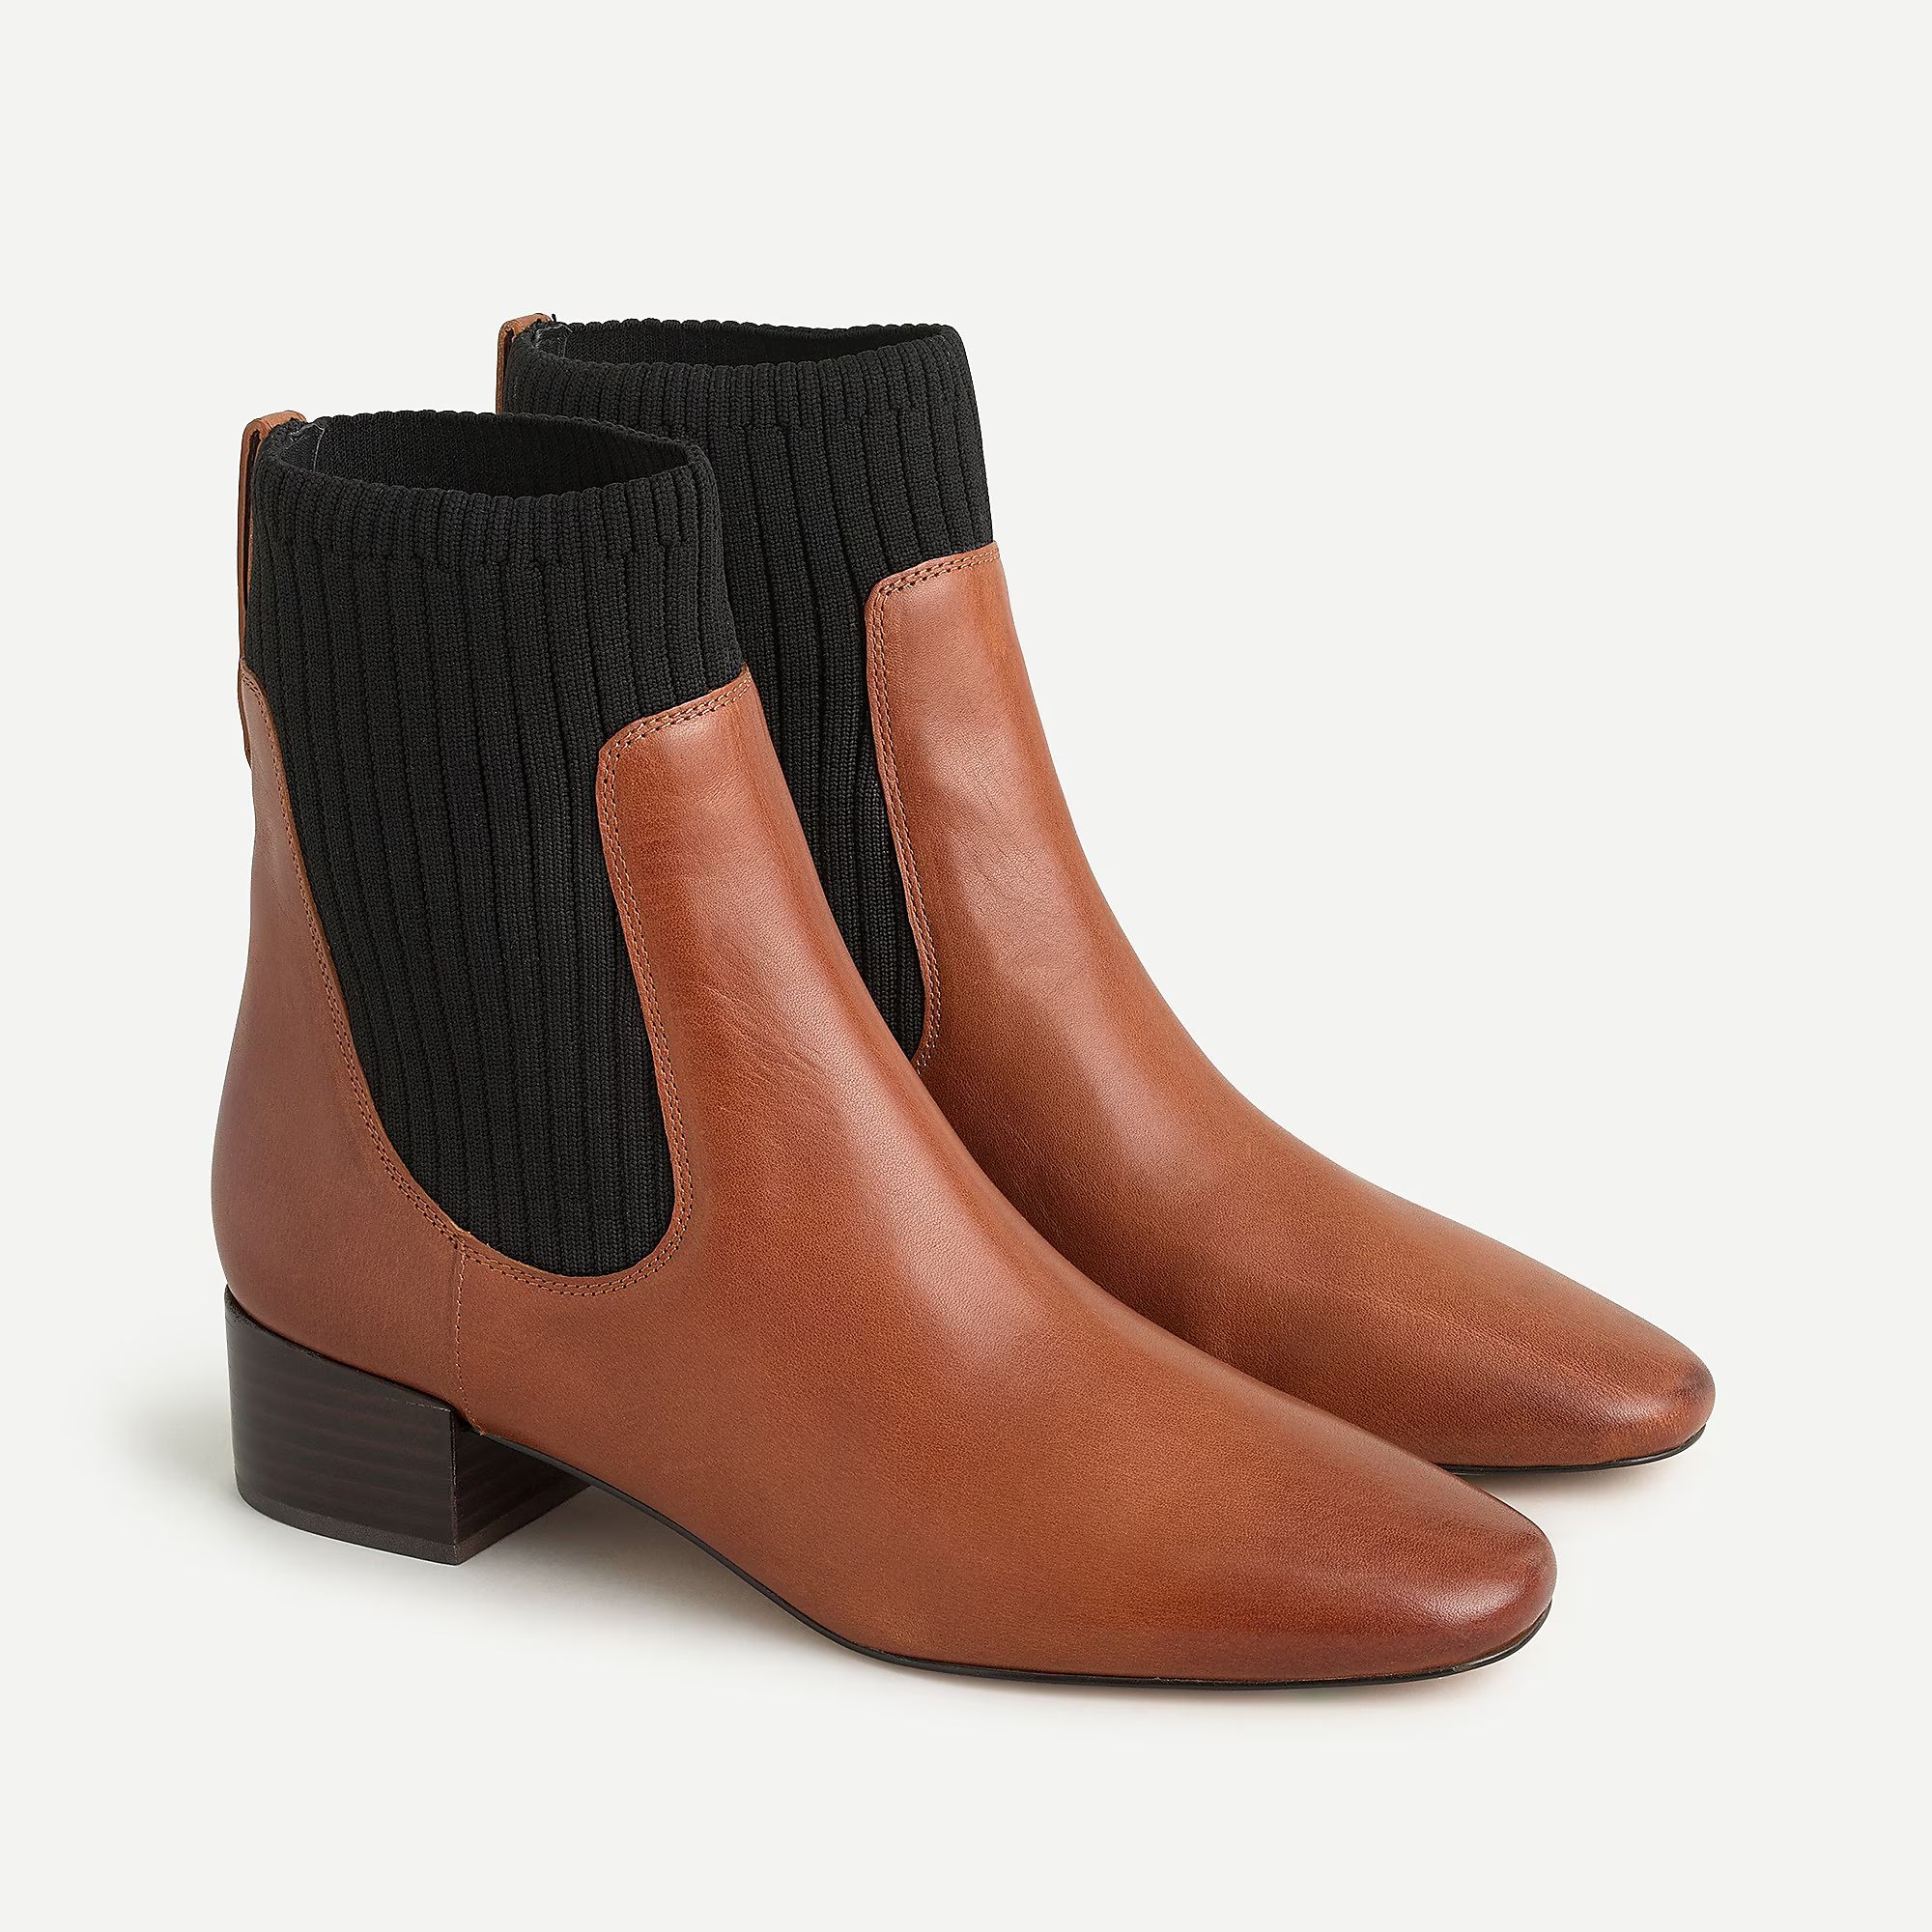 Ribbed Chelsea boots | J.Crew US